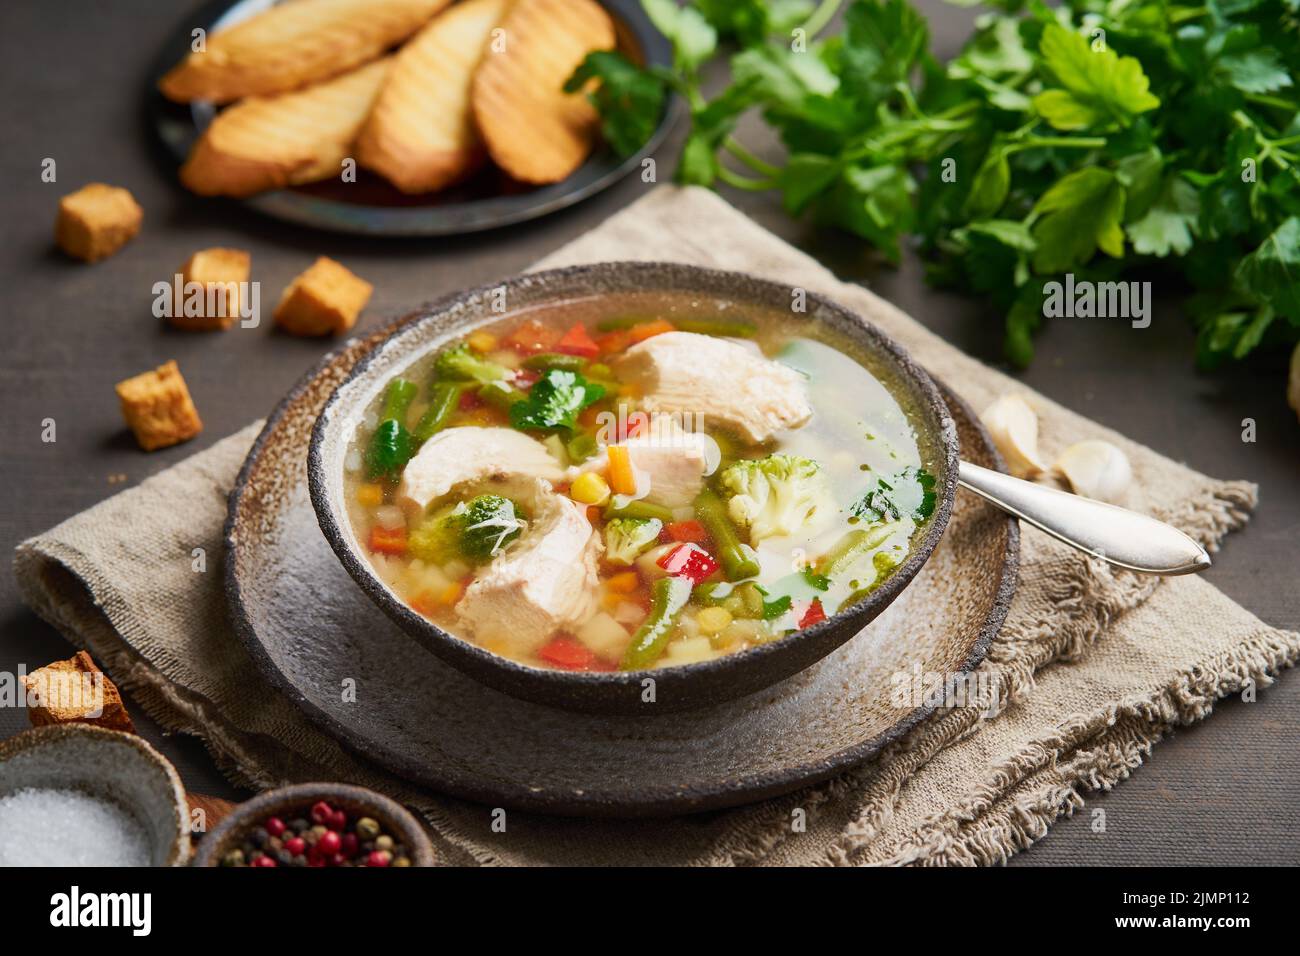 Homemade chicken soup with vegetables, crouton, broccoli on a dark brown background, side view Stock Photo